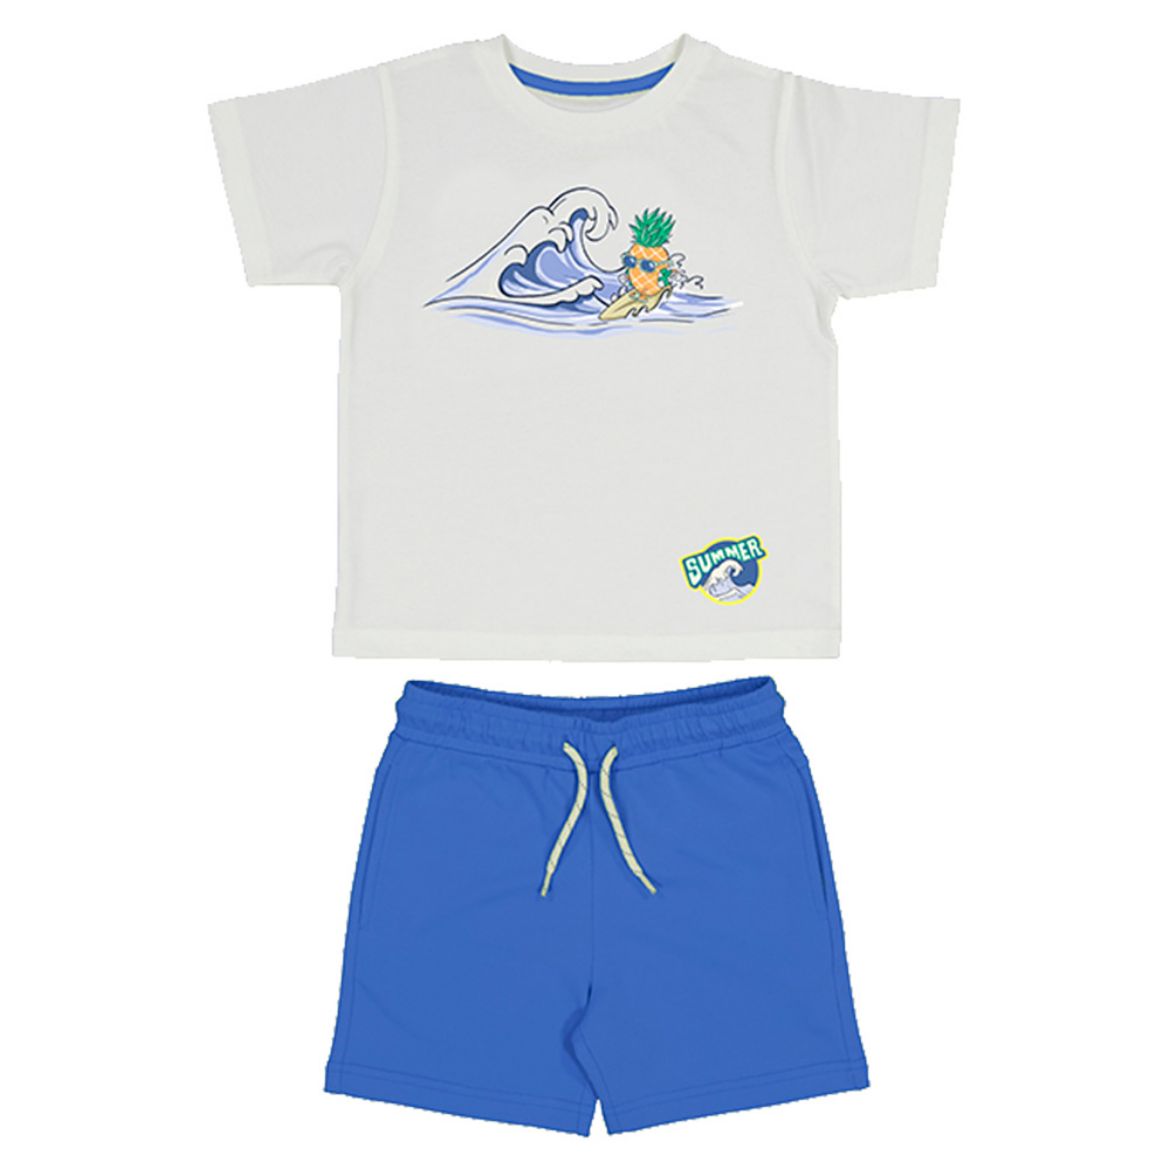 Picture of Mayoral Boys Blue & White 'Summer' Short Set